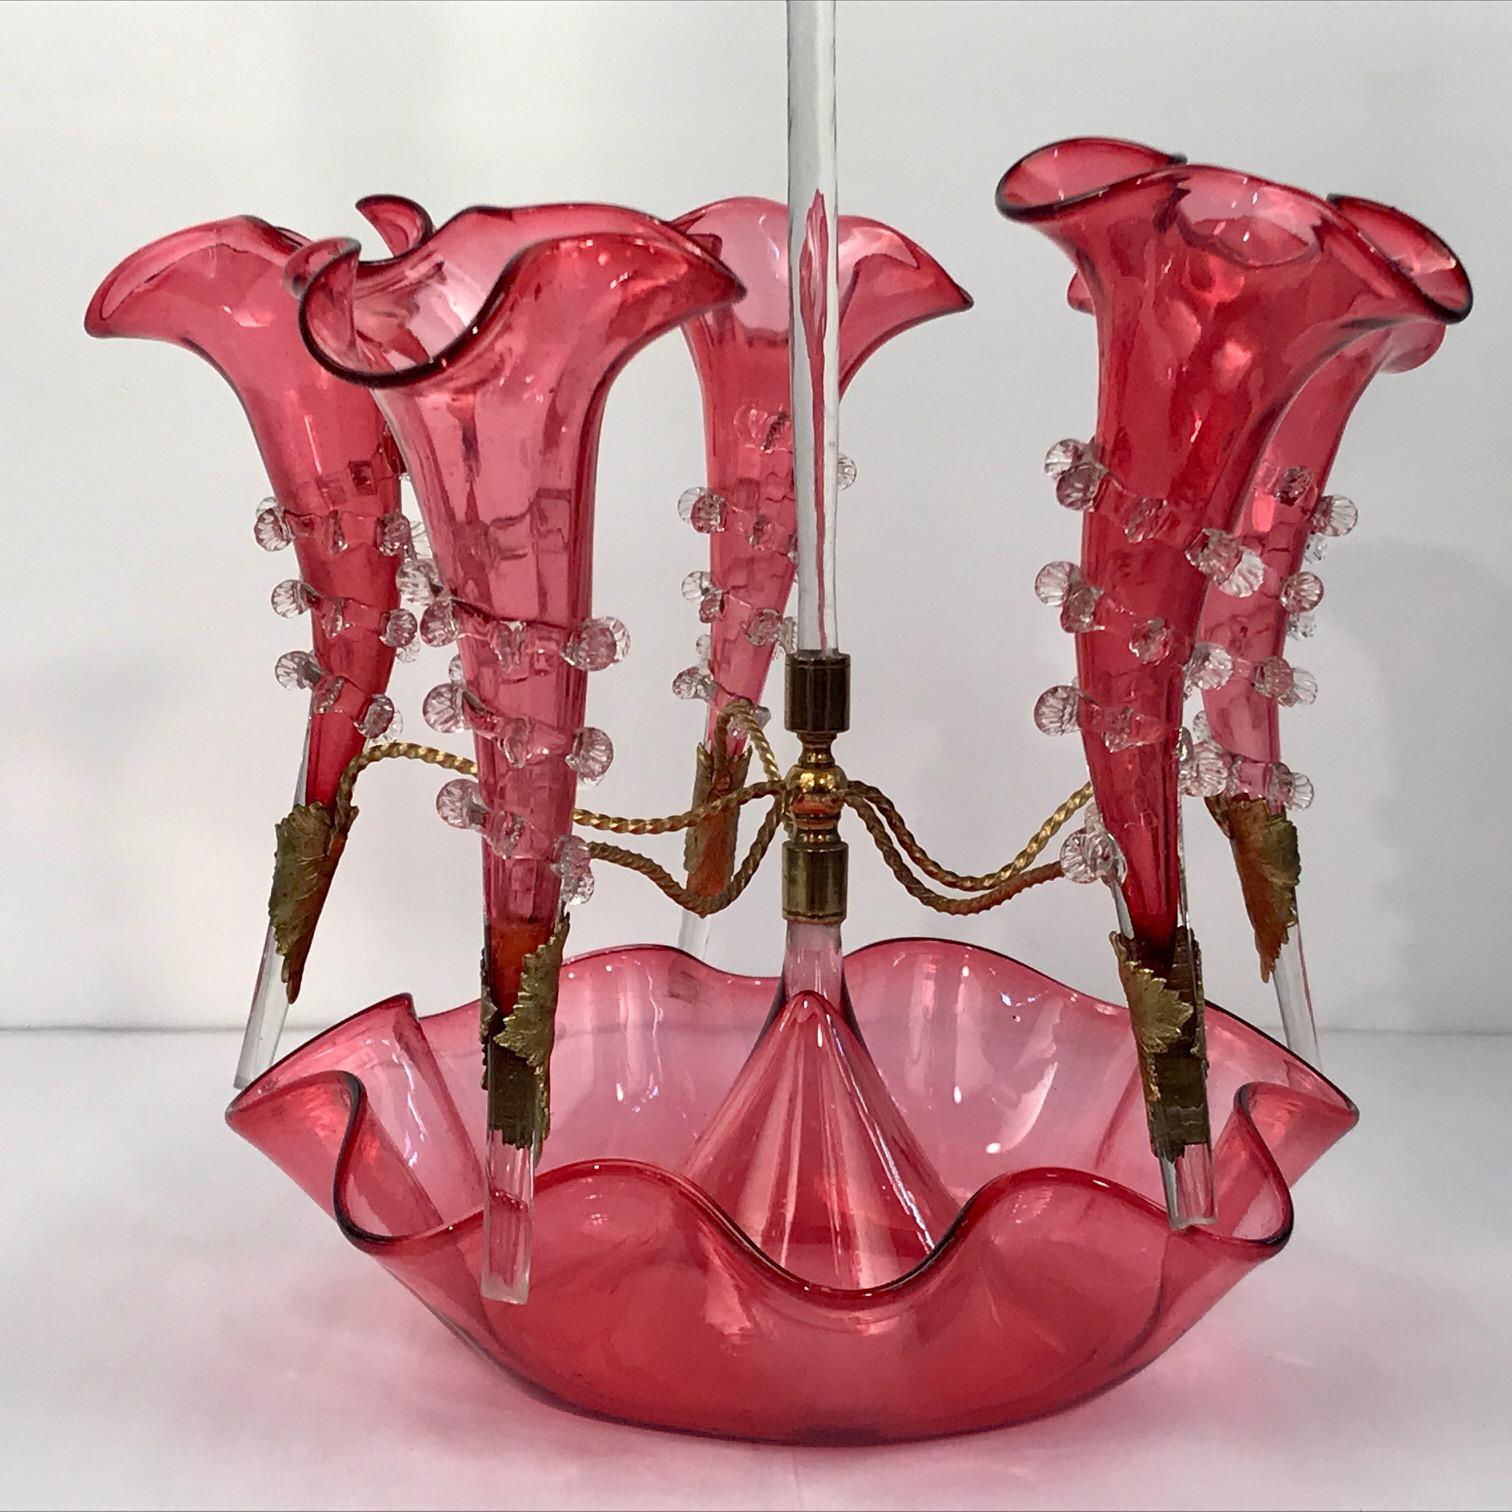 This is a remarkably fine example in excellent condition. For both fruit and flowers, this hand-blown epergne has five trumpet-shaped vases around a larger central vase, all with frilled rims and applied wrythen clear ornament. The vases are